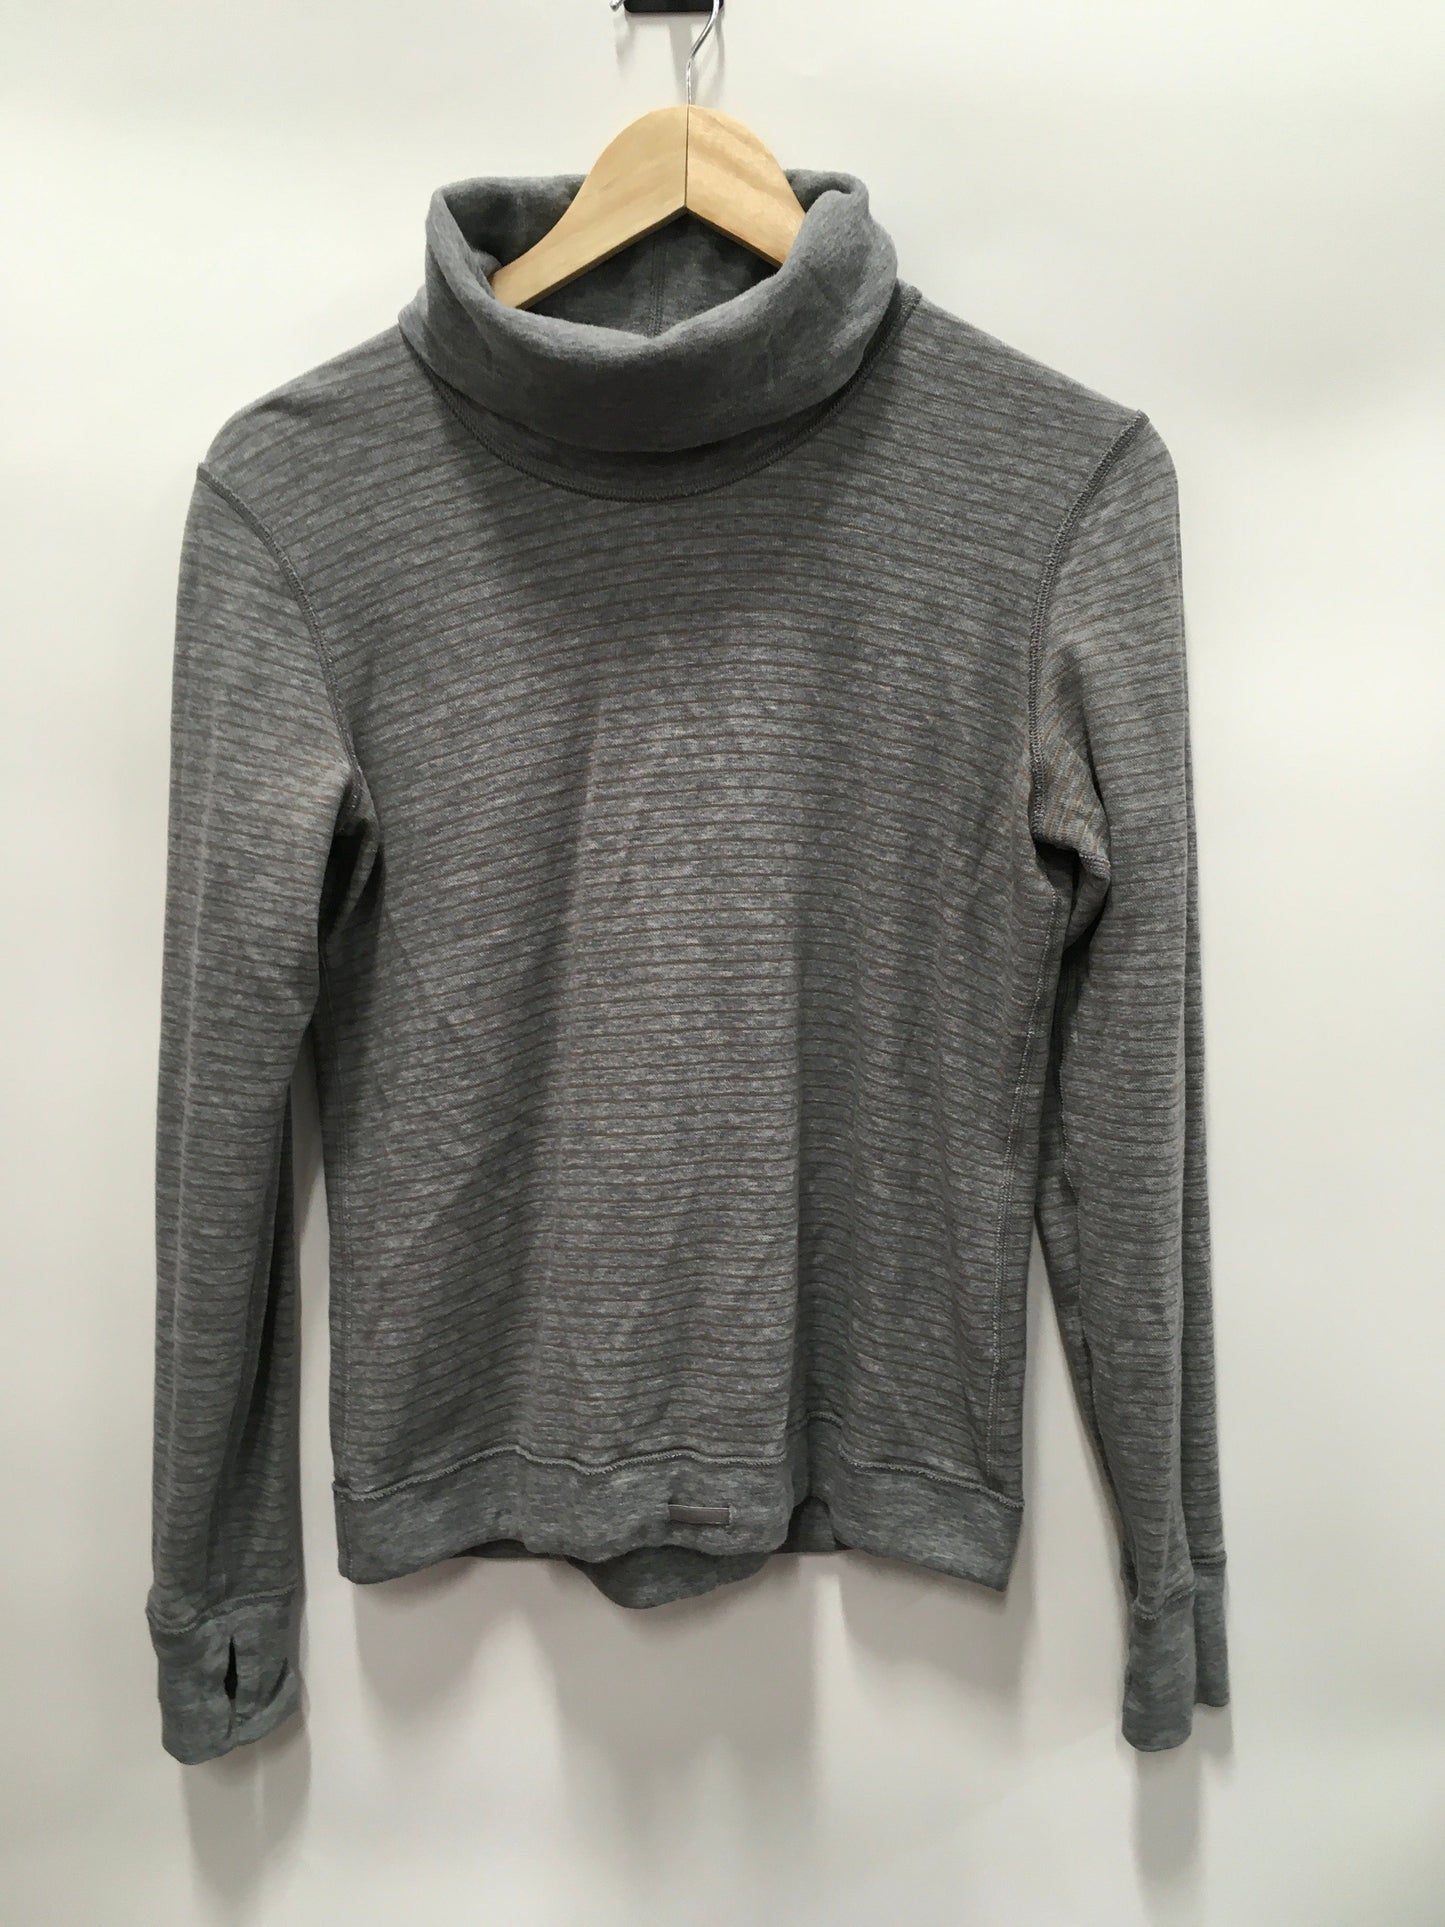 Athletic Top Long Sleeve Collar By Lululemon  Size: 4